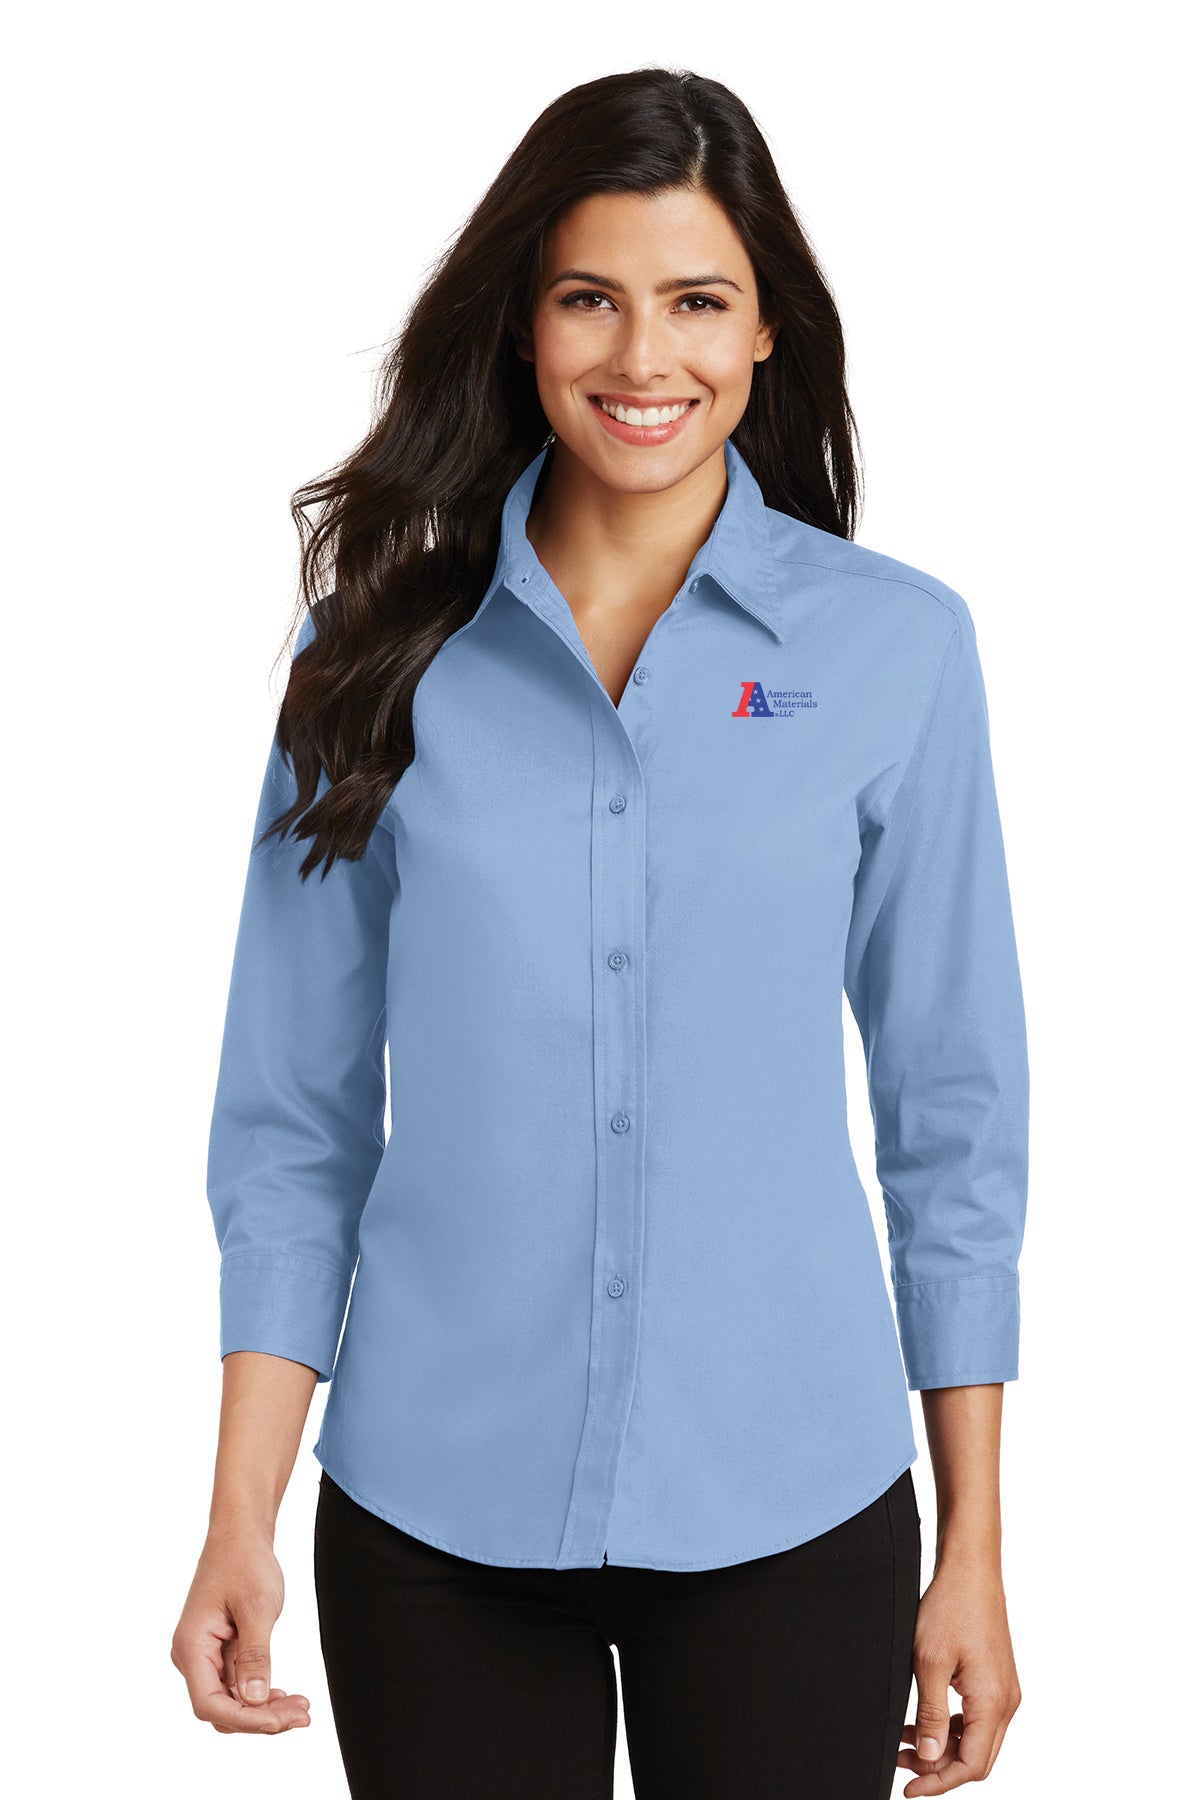 American Materials Ladies Button Up Shirt